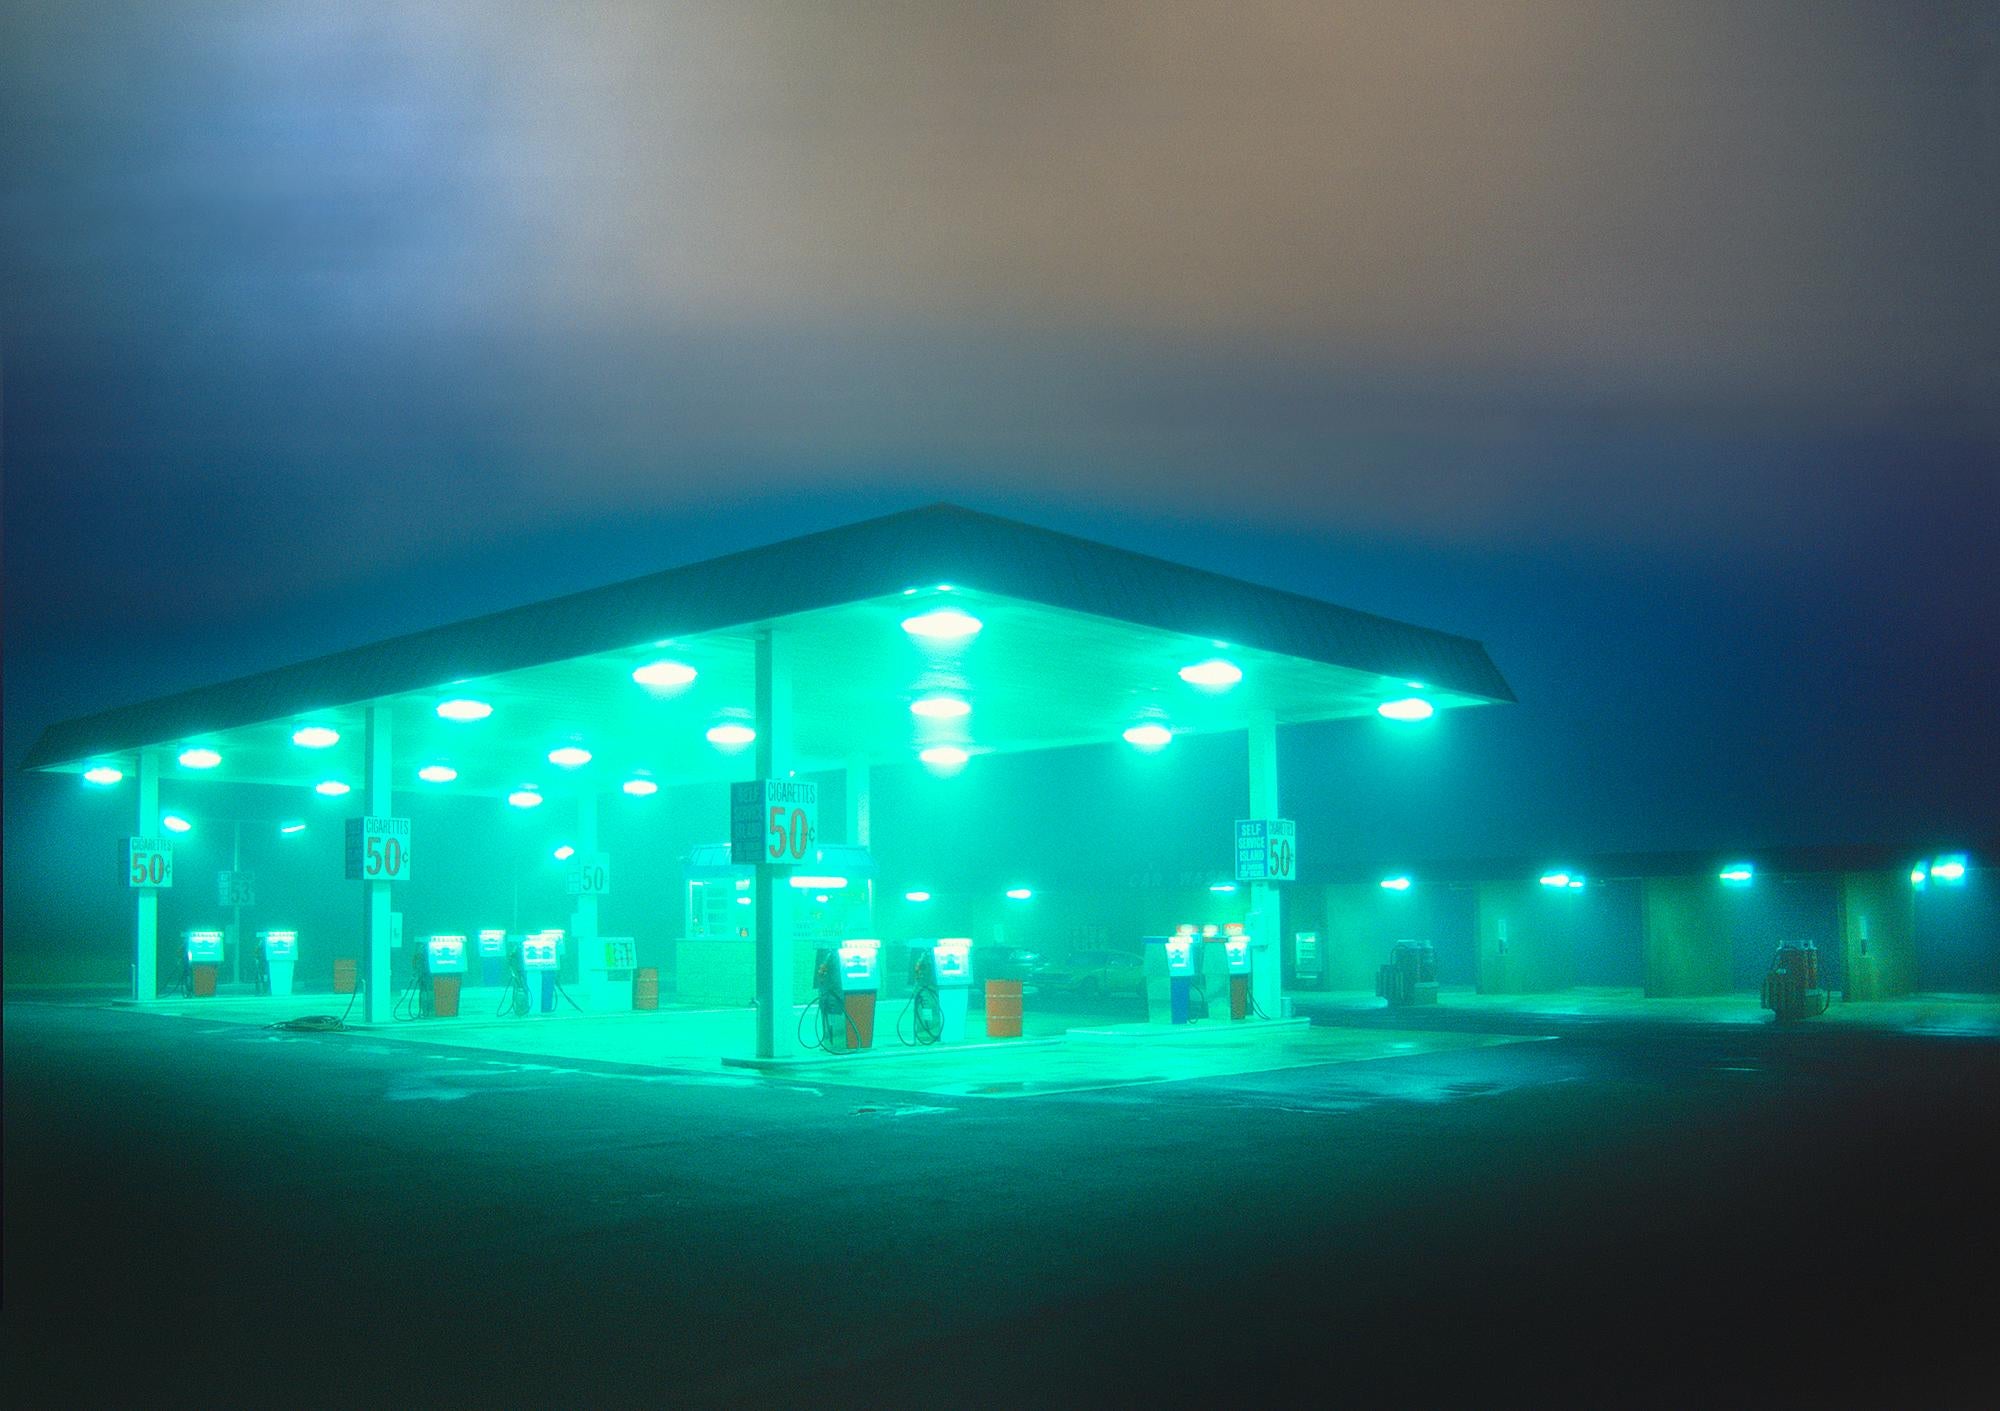 Surreal Gas Station on a Foggy Night with Green Lights. Close Encounters 